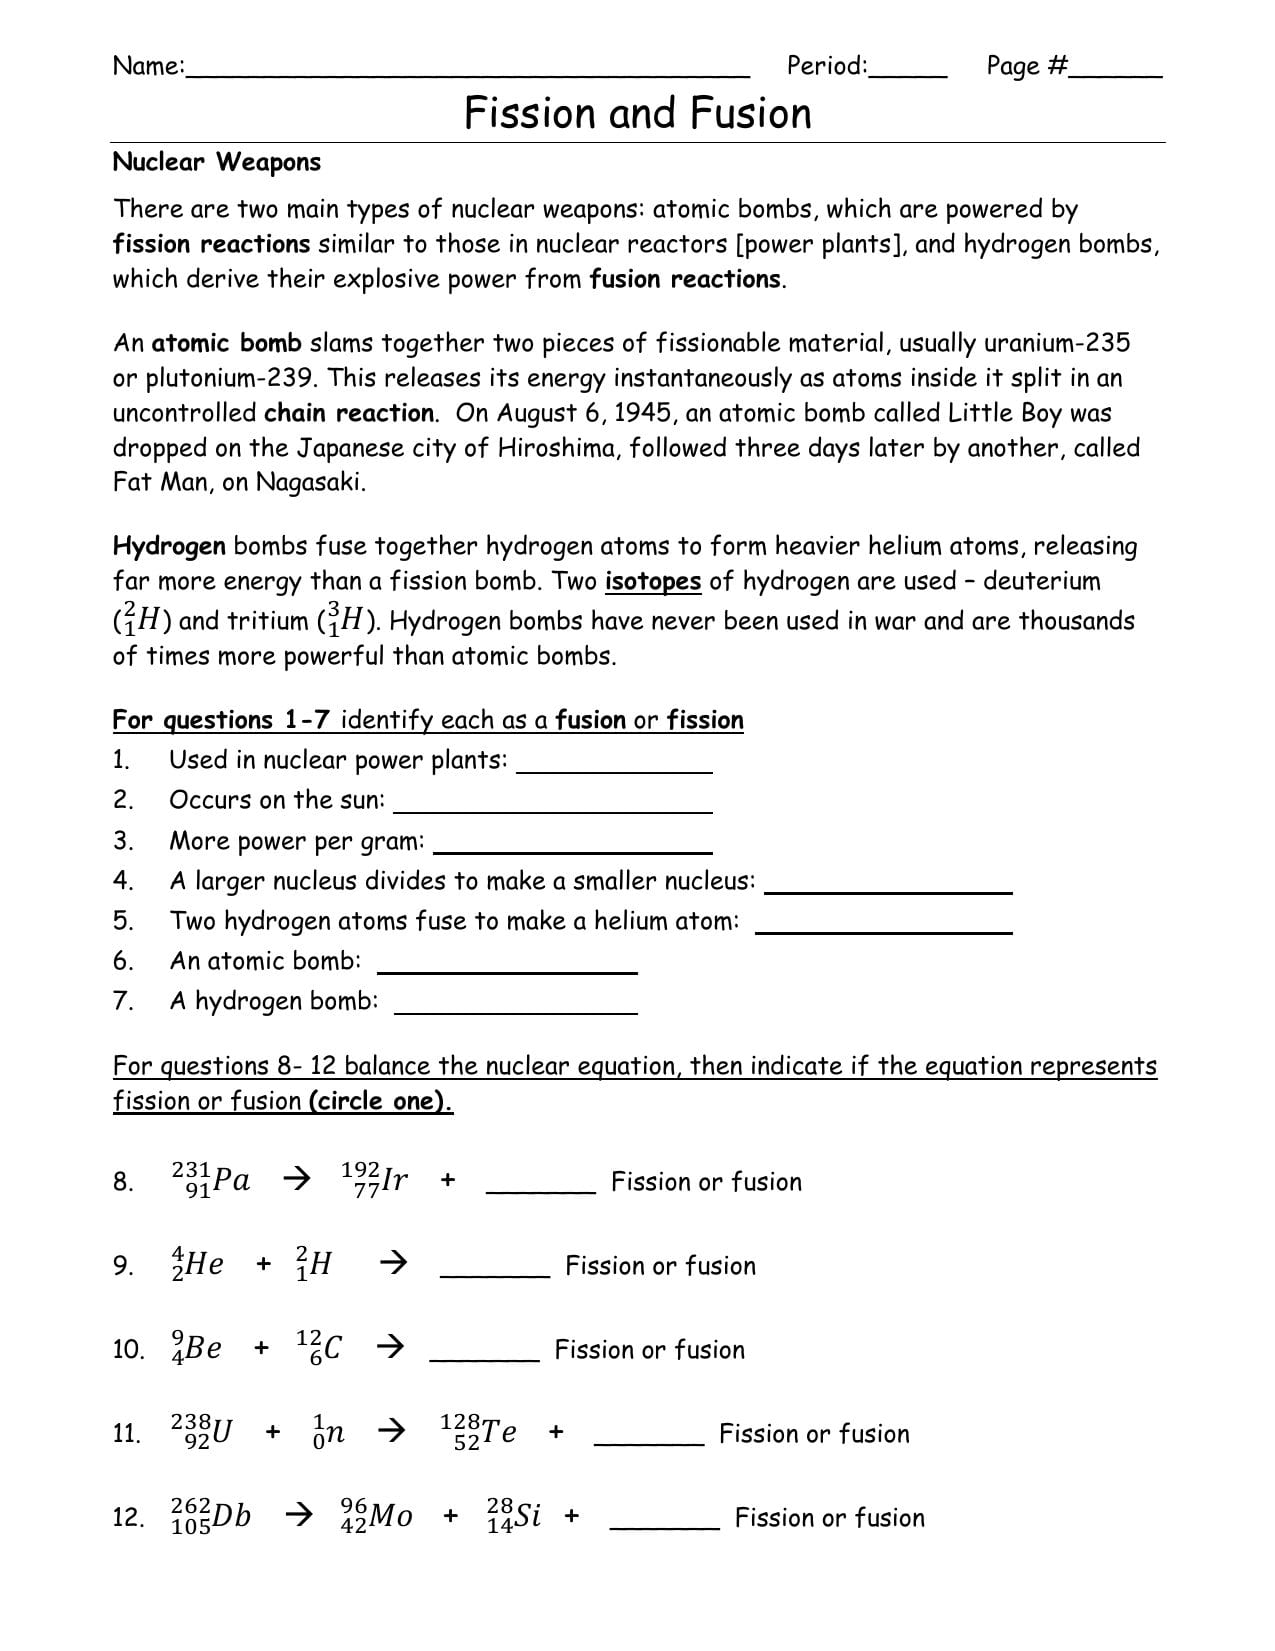 Fission Vs Fusion Worksheet Throughout Fission Versus Fusion Worksheet Answers